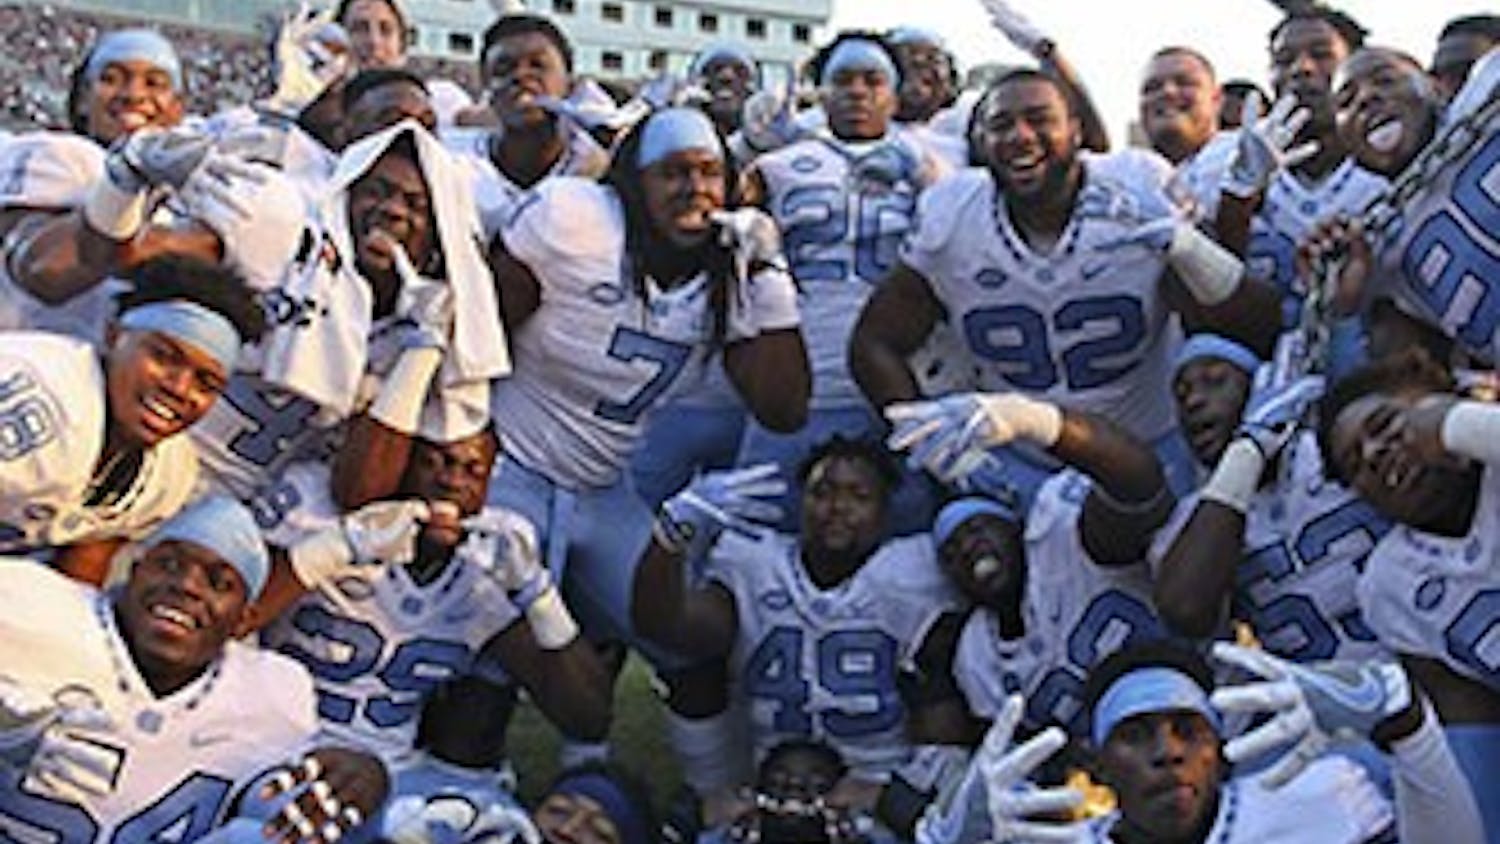 The UNC football team poses for a picture after its victory over Florida State in Tallahassee on Oct. 1.